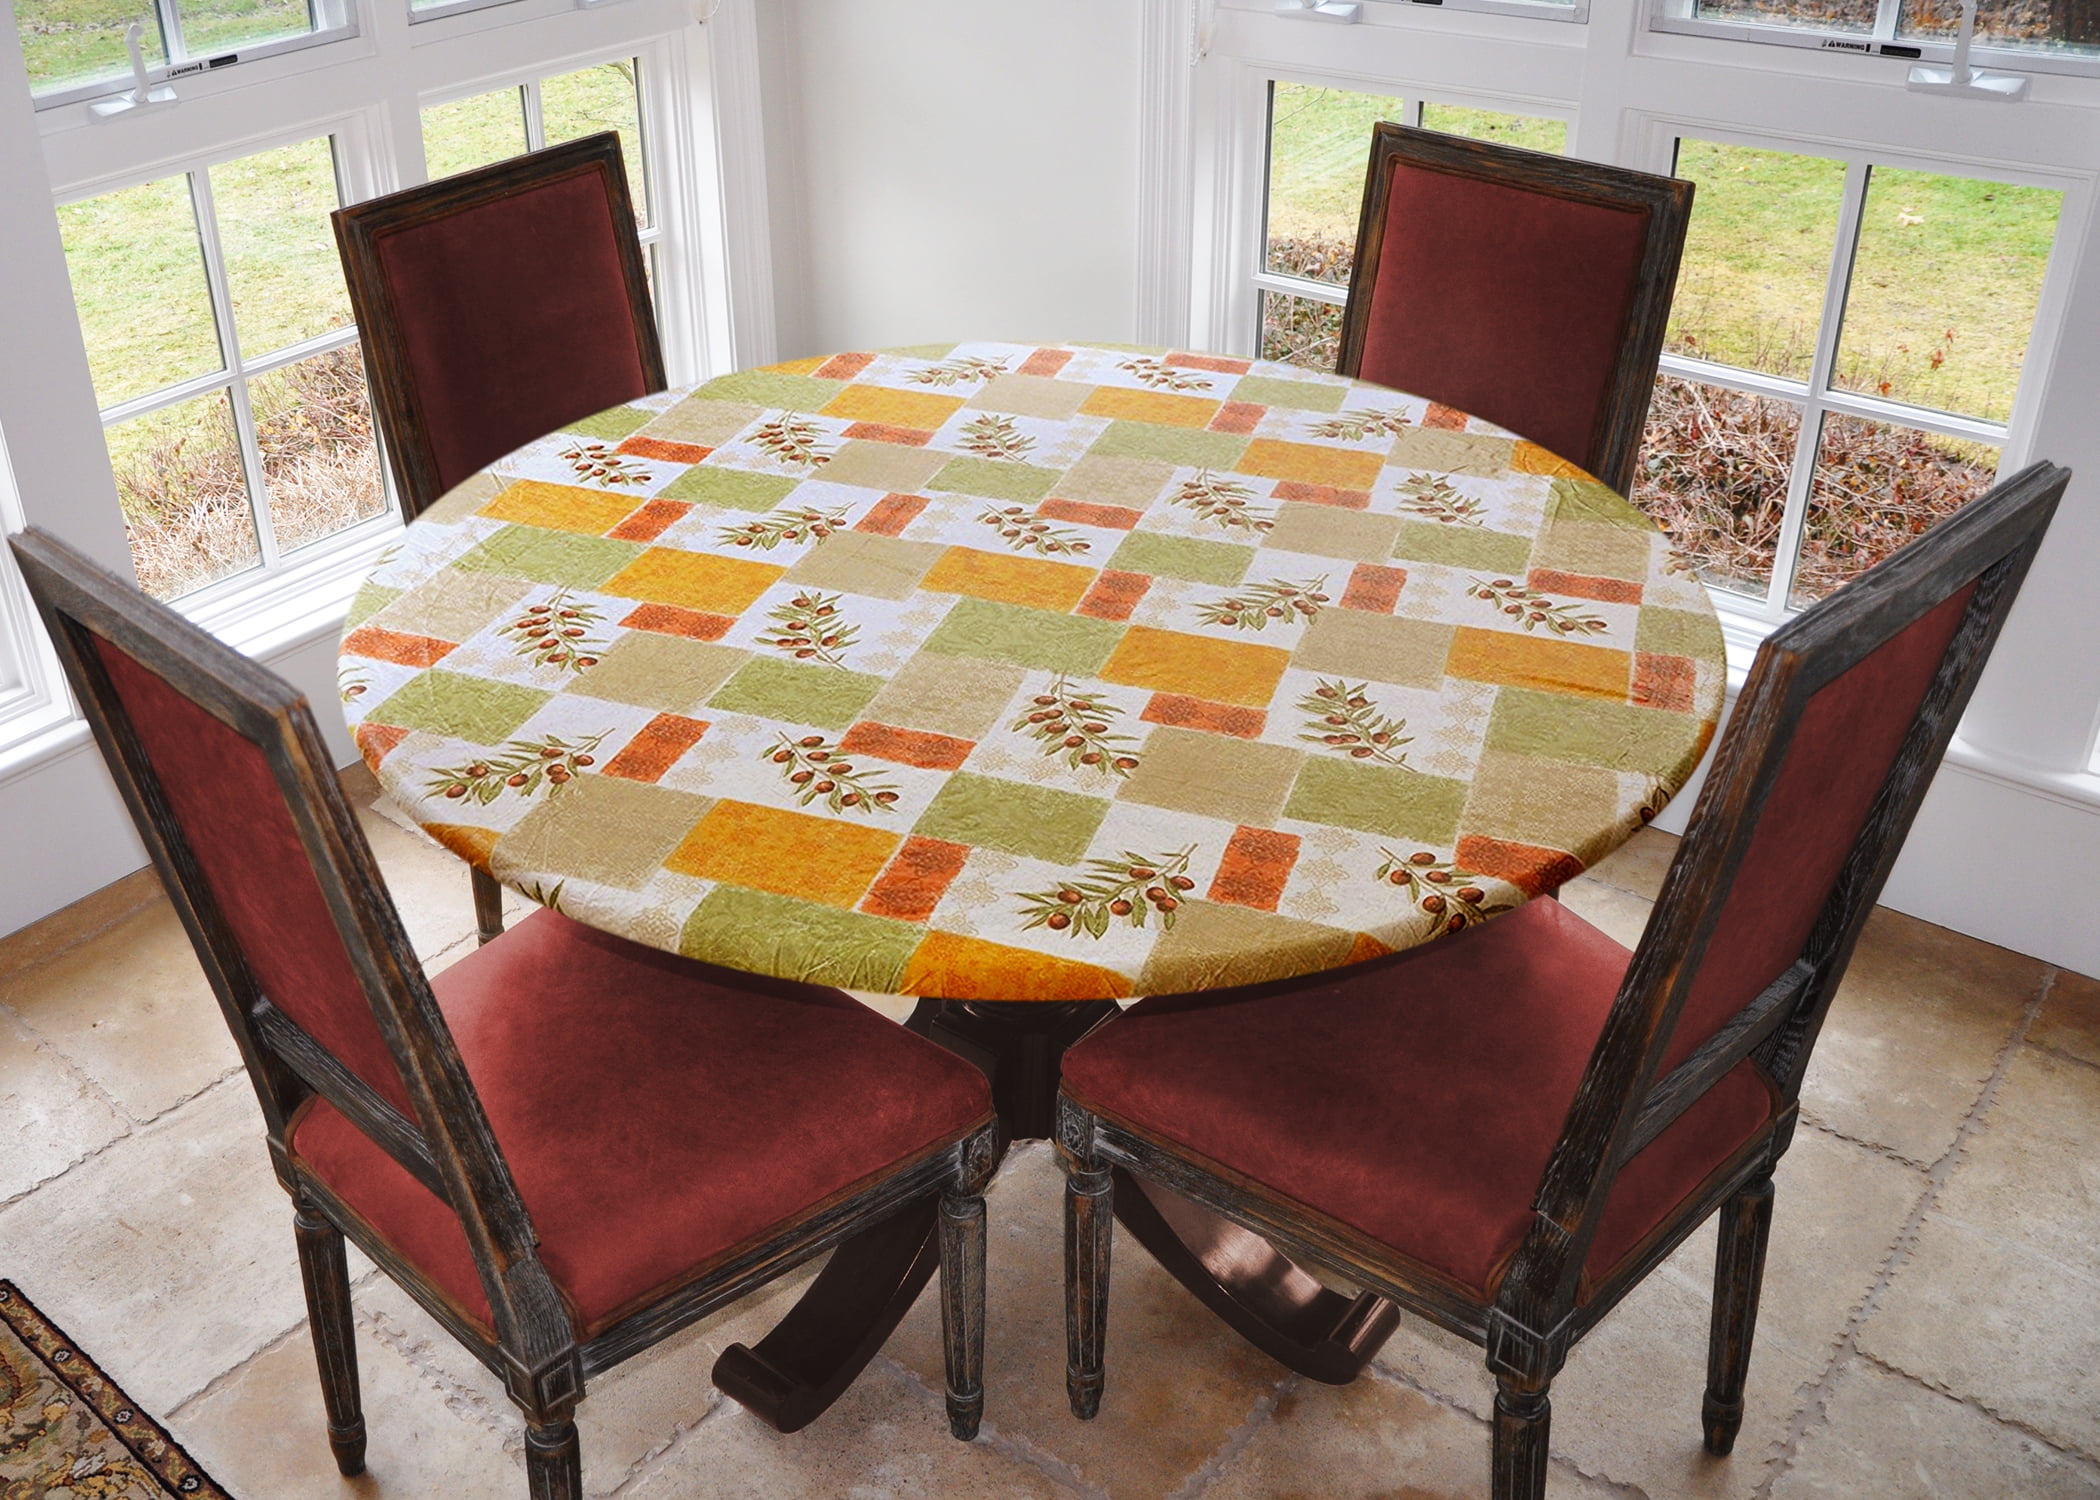 Elastic Edged Flannel Backed Fits Easily Around Any Round Table Up to 40-44 Diameter YILE Vinyl Round Fitted Tablecloth for Indoor/Outdoor Use Happy Thanksgiving Day 